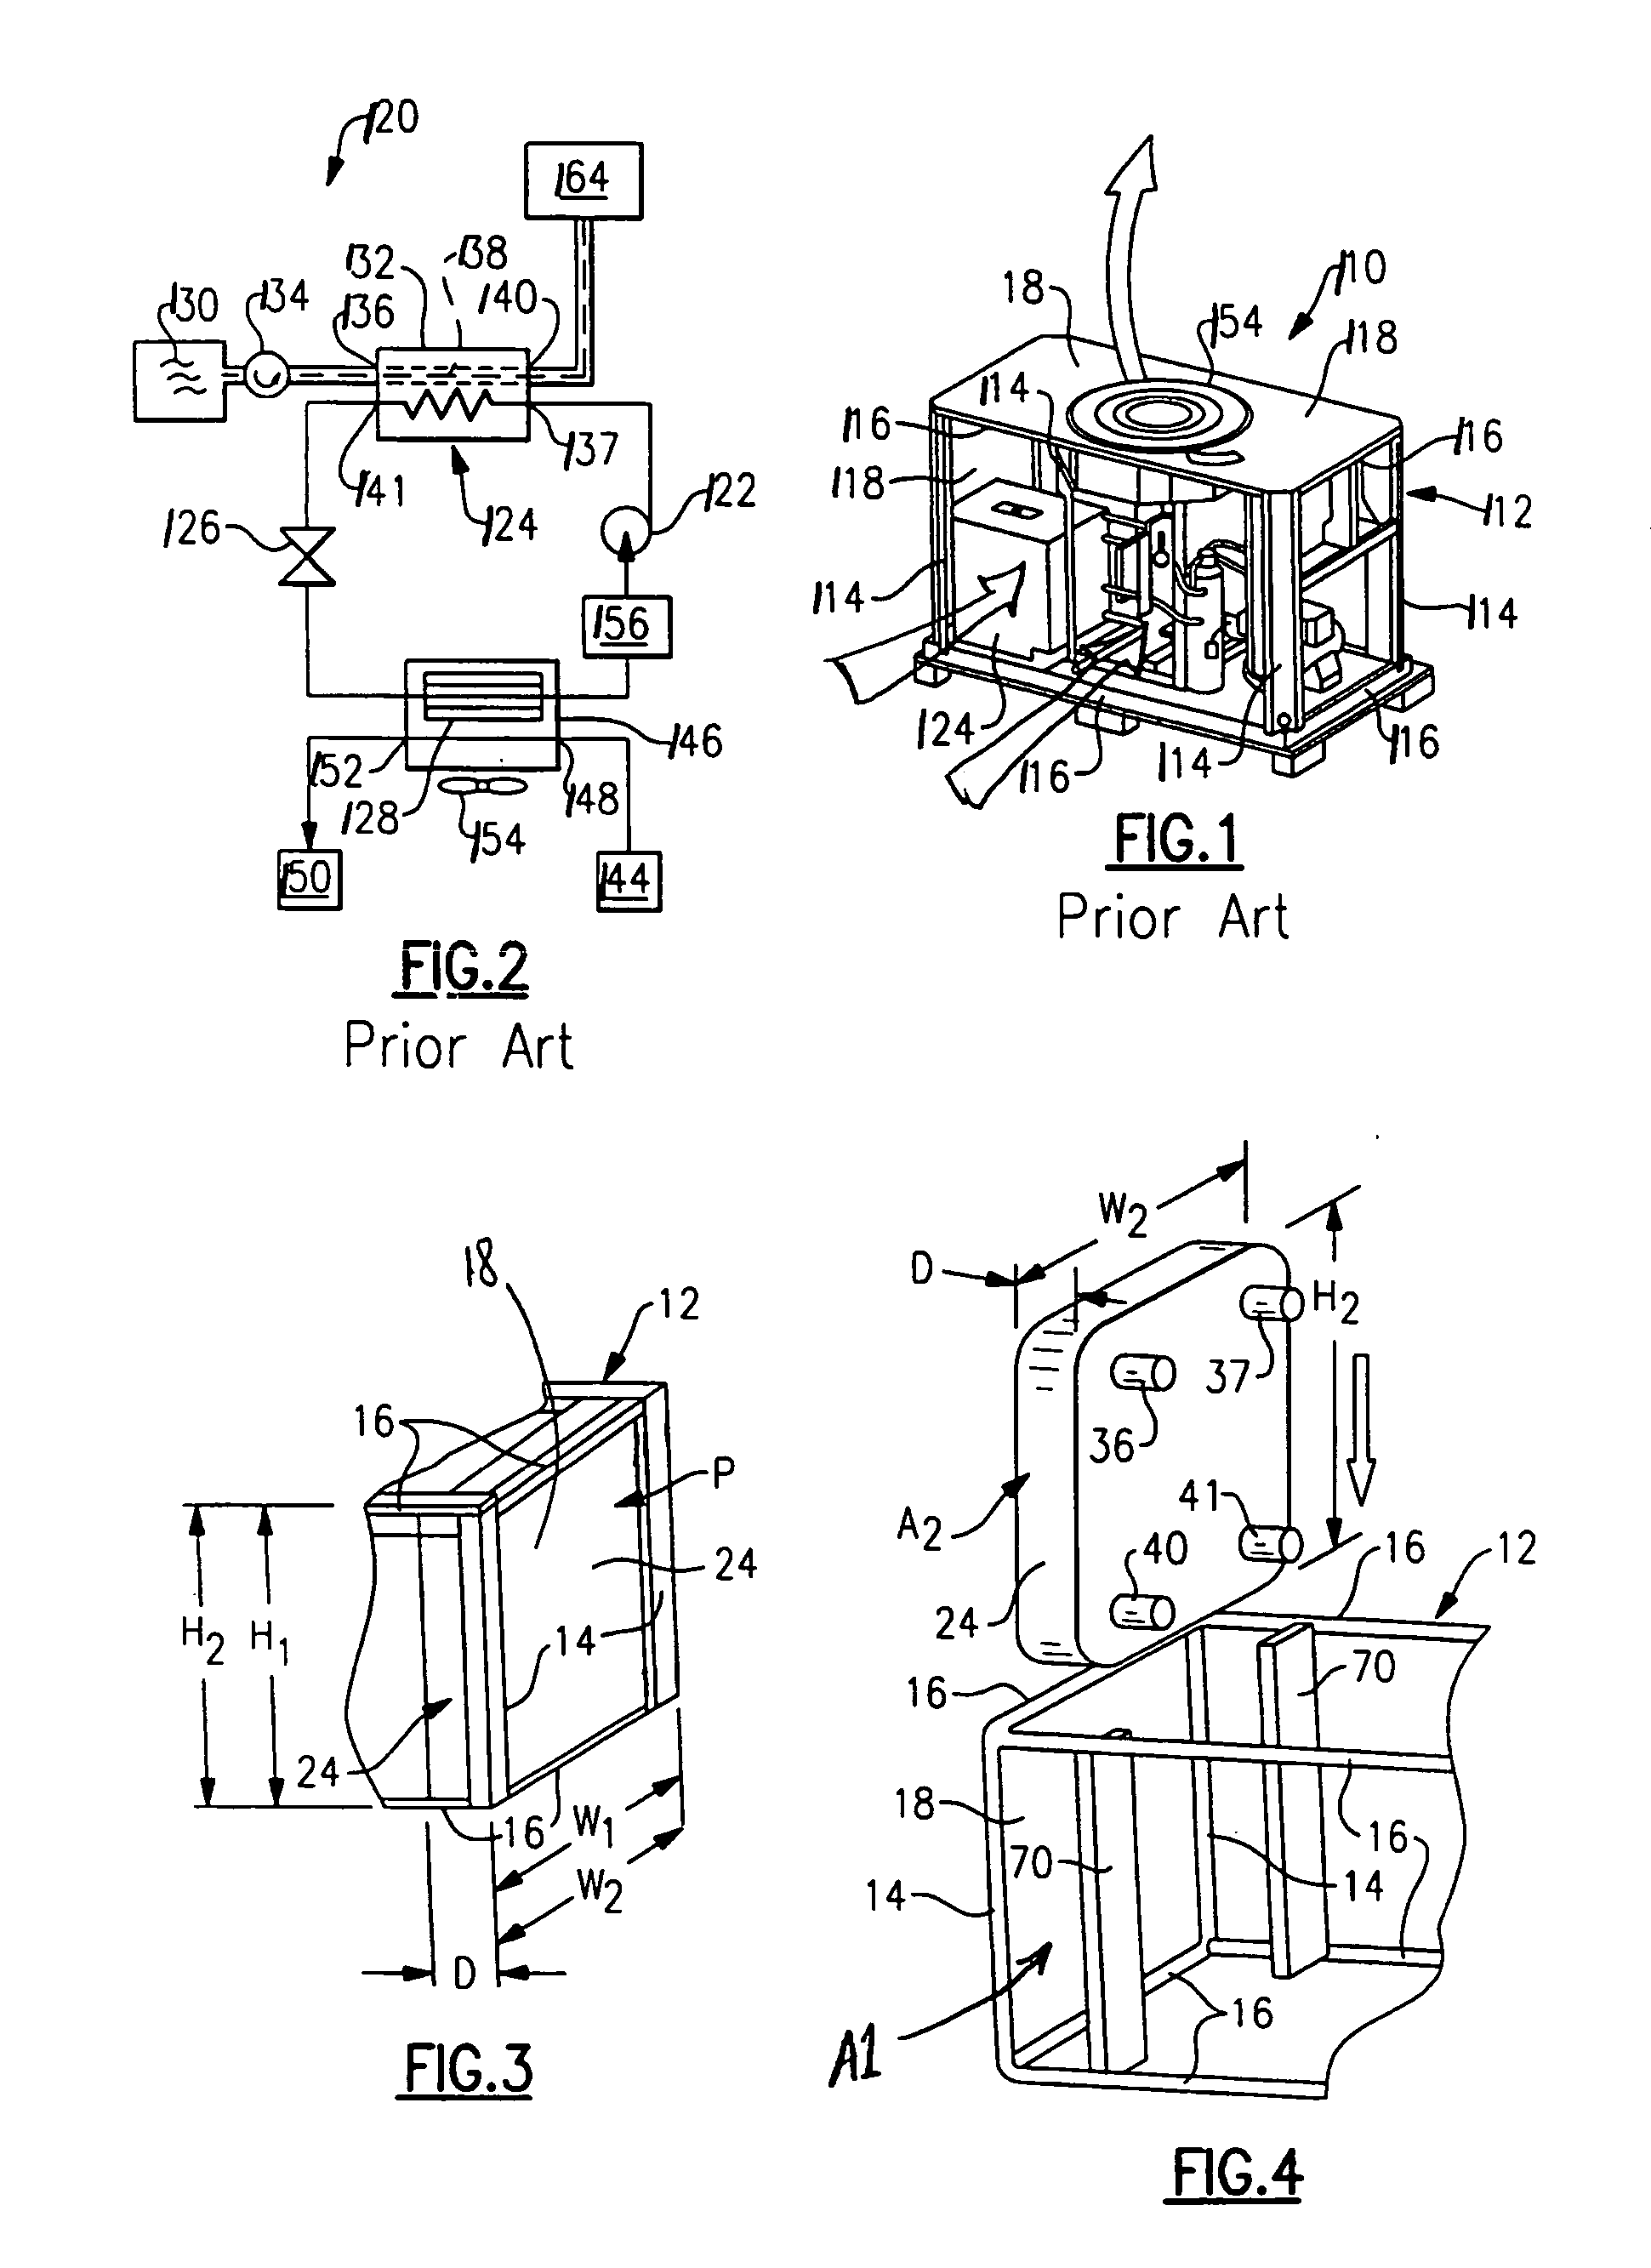 Gas cooler configuration integrated into heat pump chassis